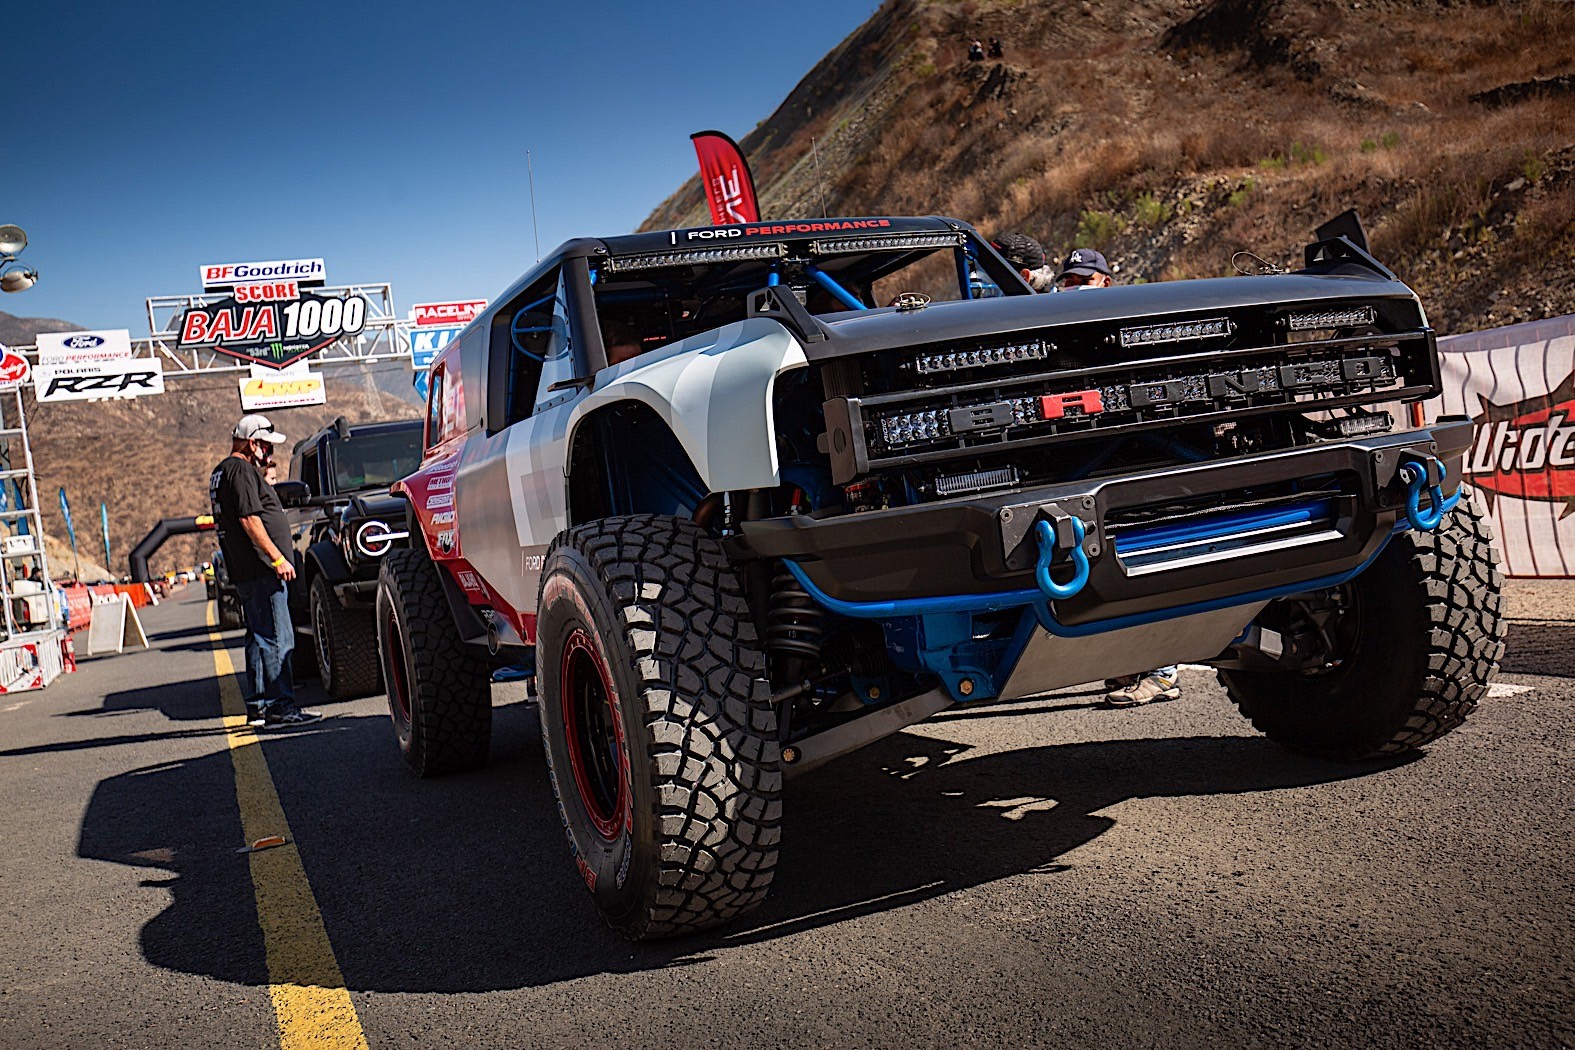 Ford Bronco R Finishes the Baja 1000 Race in 32 Hours - autoevolution